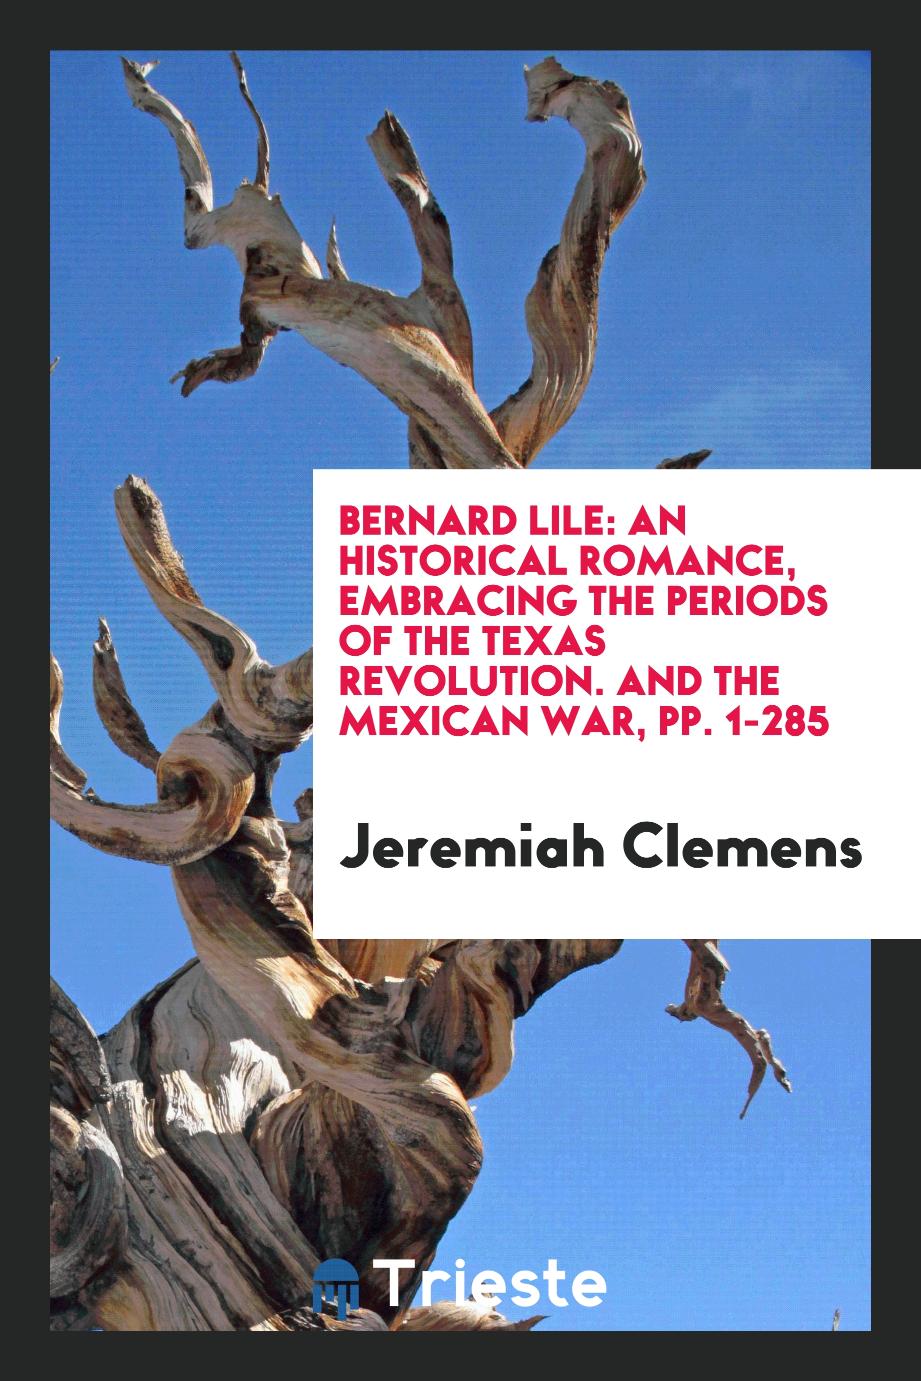 Bernard Lile: An Historical Romance, Embracing the Periods of the Texas Revolution. And the Mexican War, pp. 1-285